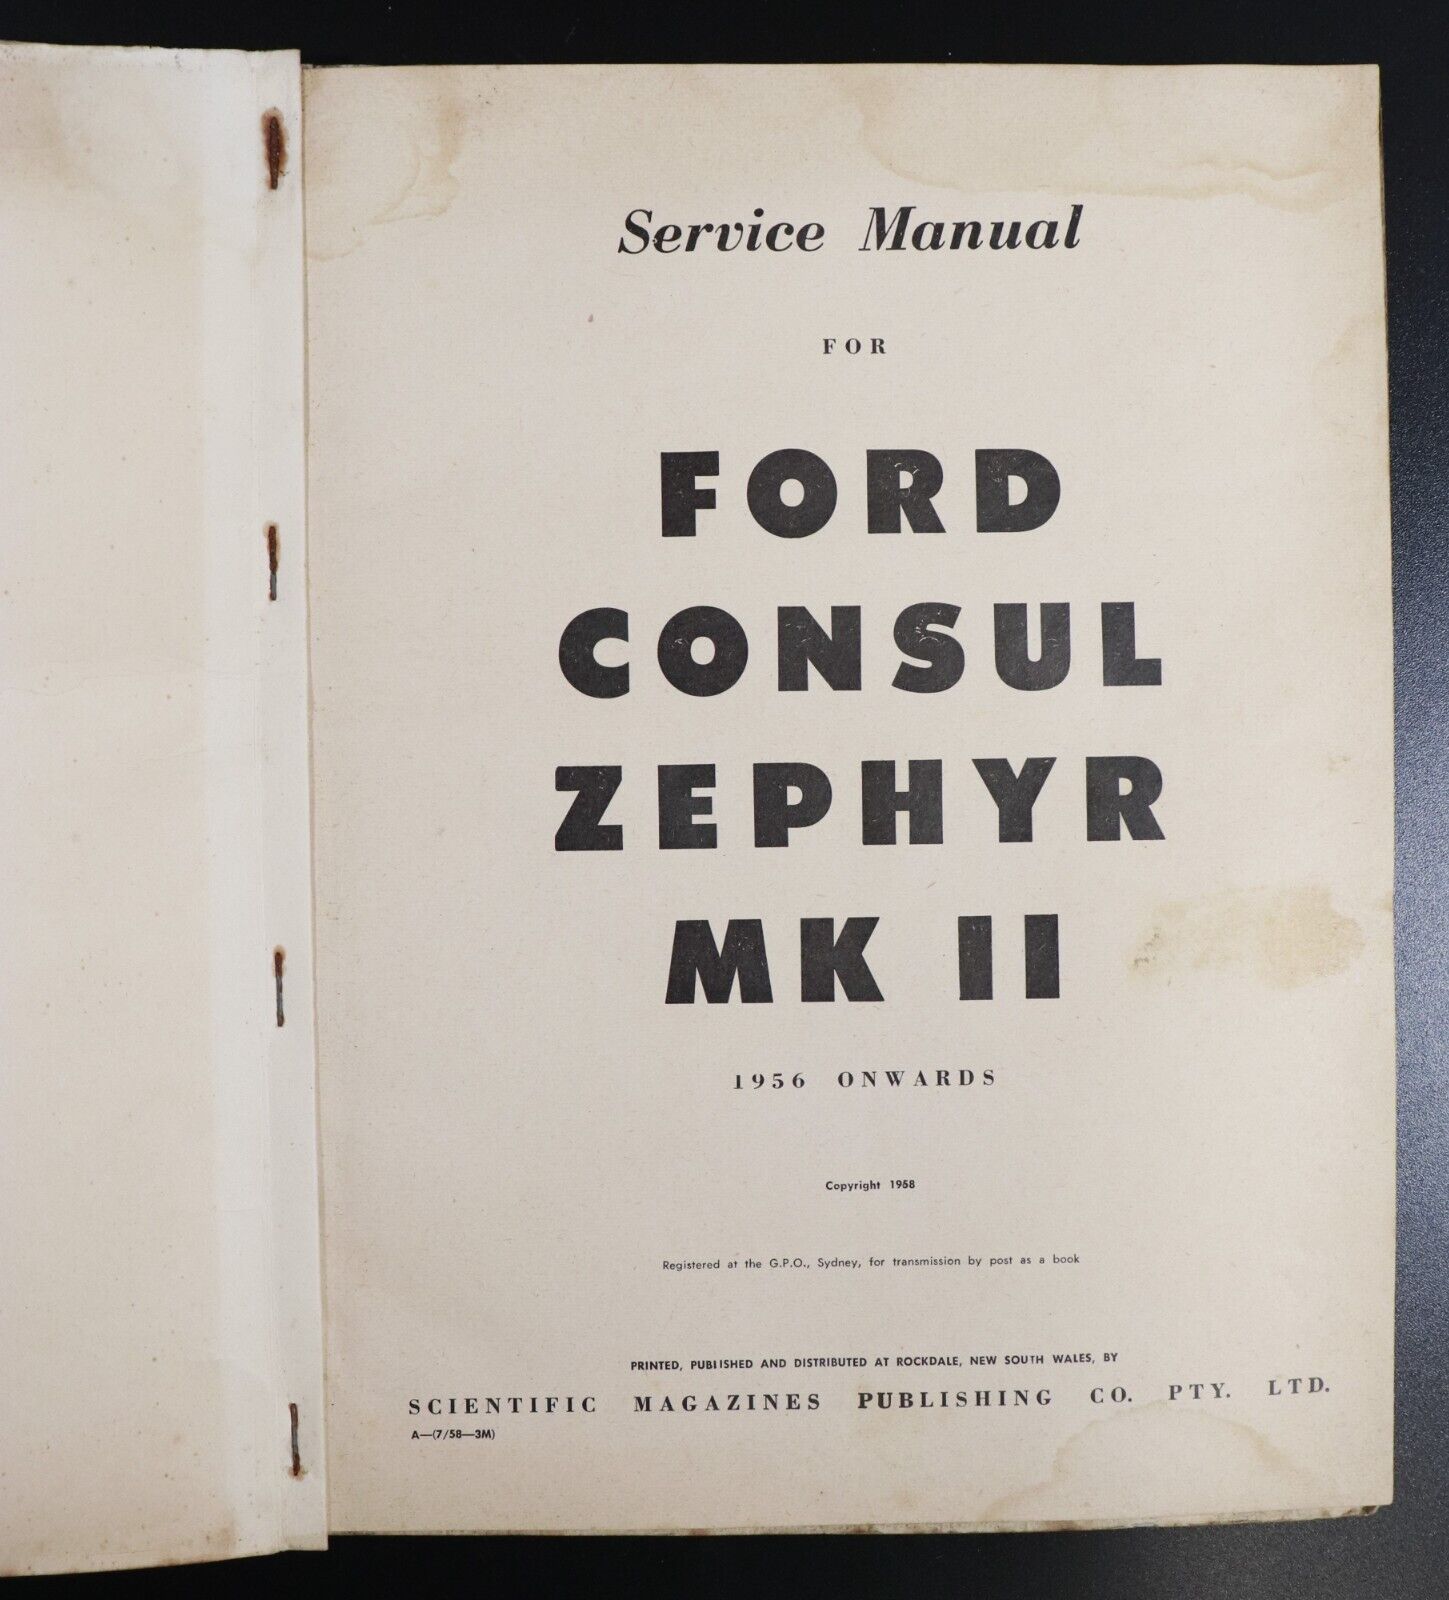 1958 Service Manual For Ford Consul Zephyr MK II 1956 Onwards Automotive Book - 0